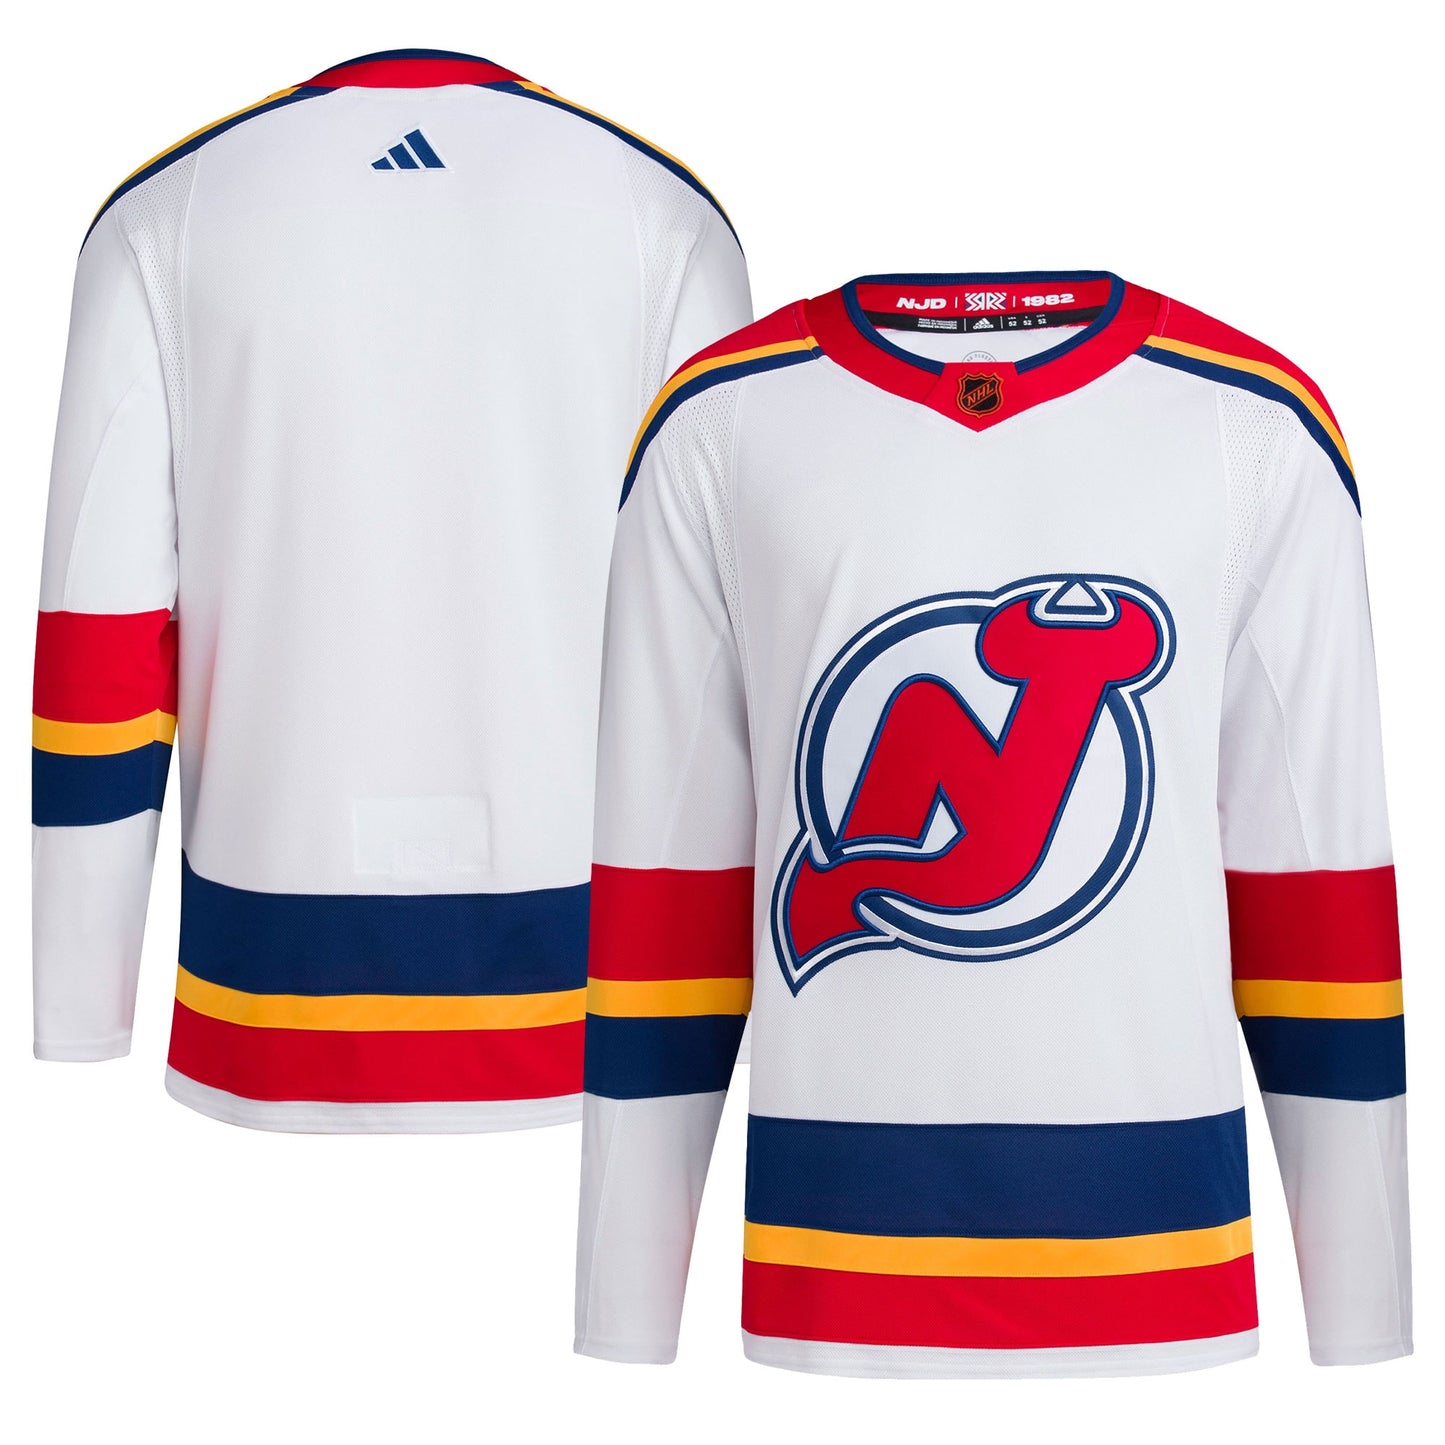 New Jersey Devils adidas Reverse Retro 2.0 Authentic Blank Jersey - White